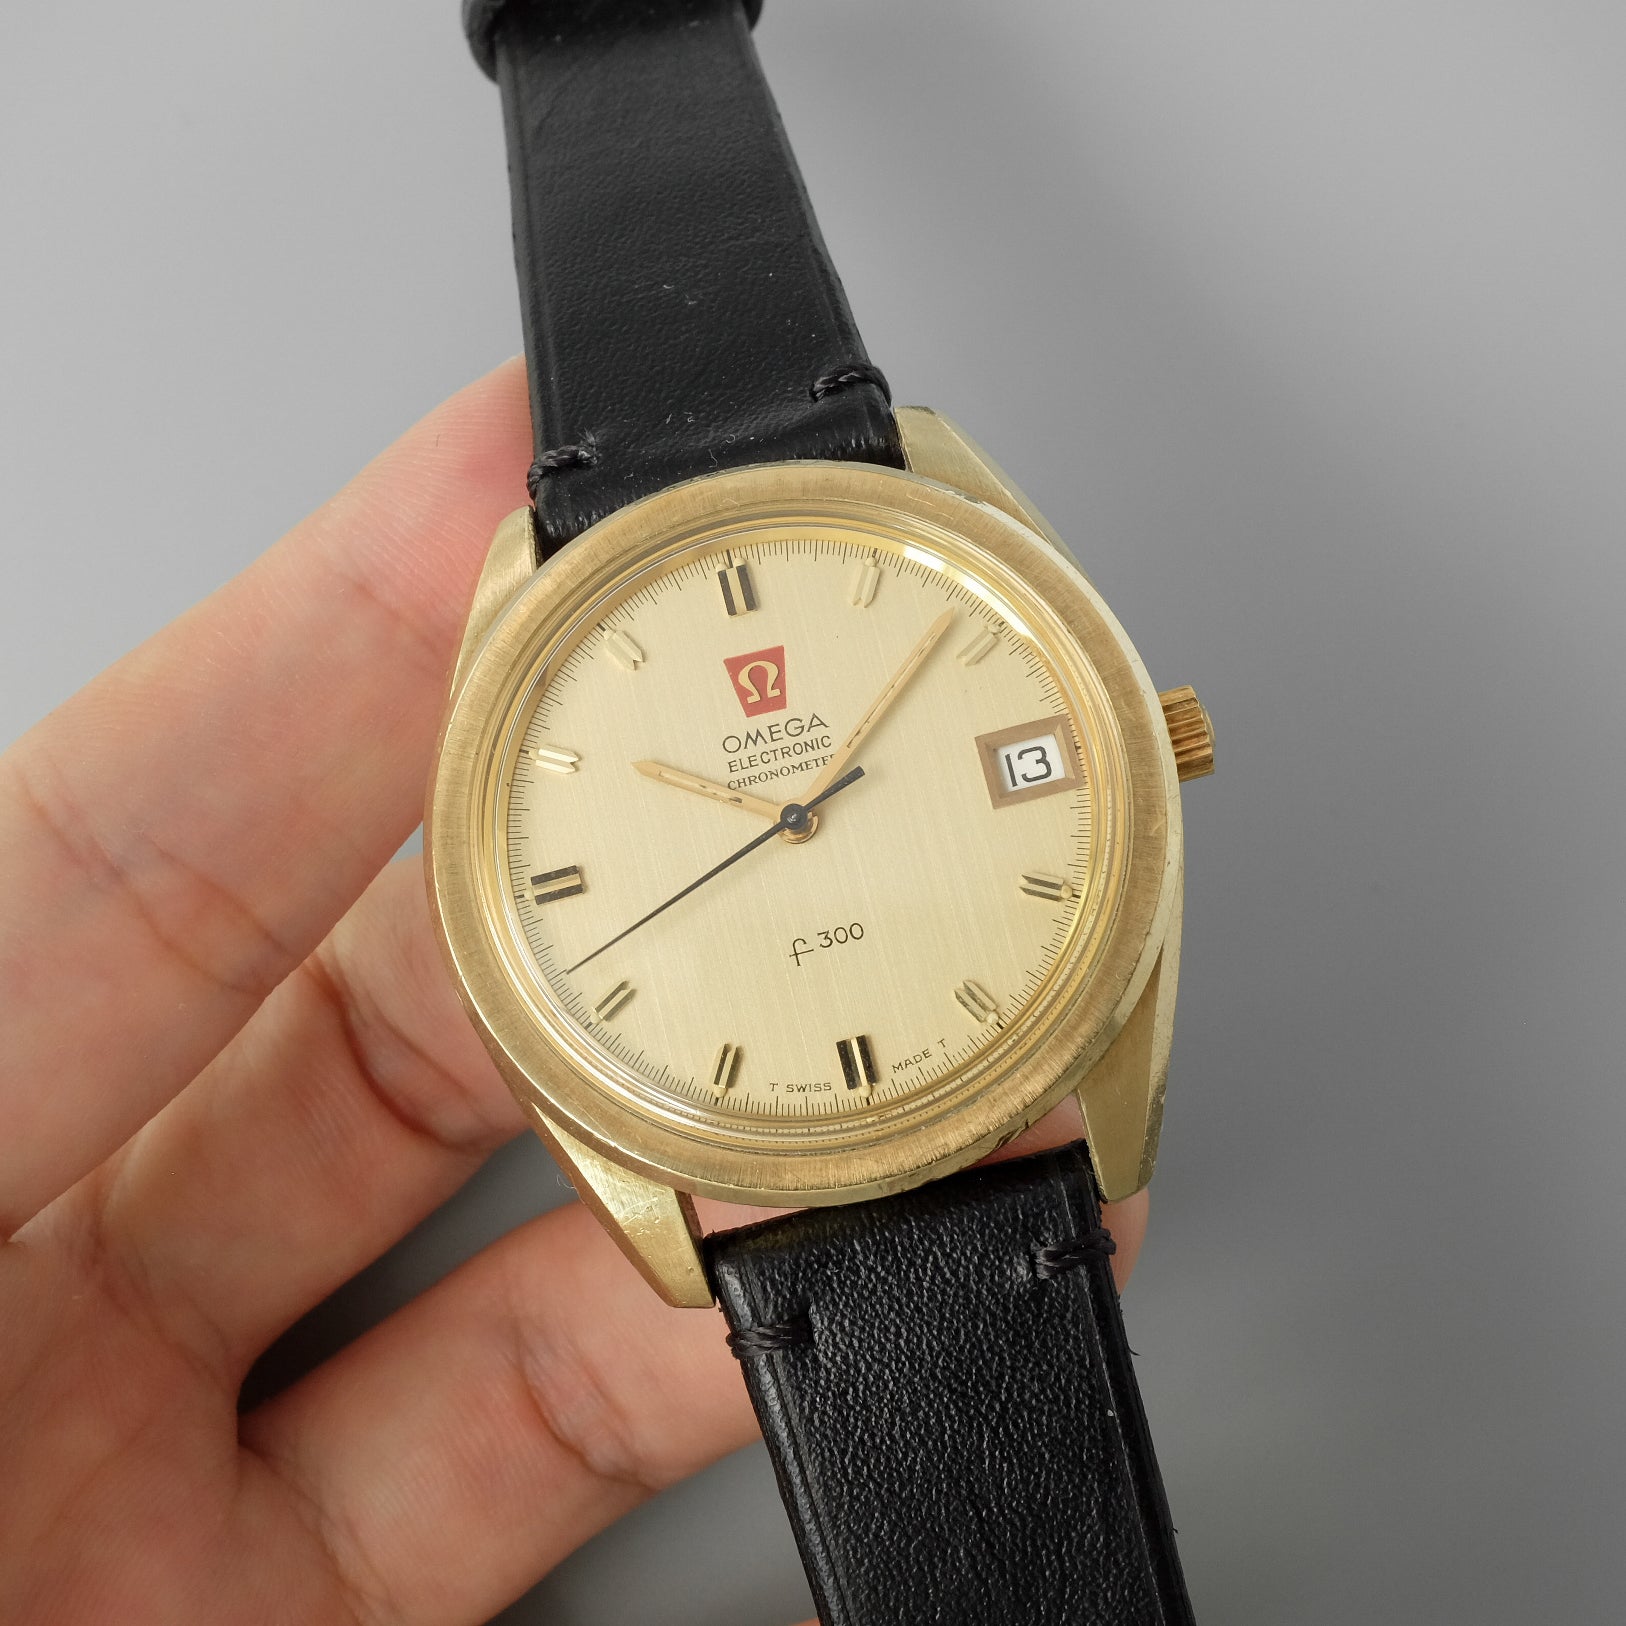 Omega Chronometer Electronic f 300 Hz Seamaster CD 198.001 from 1972